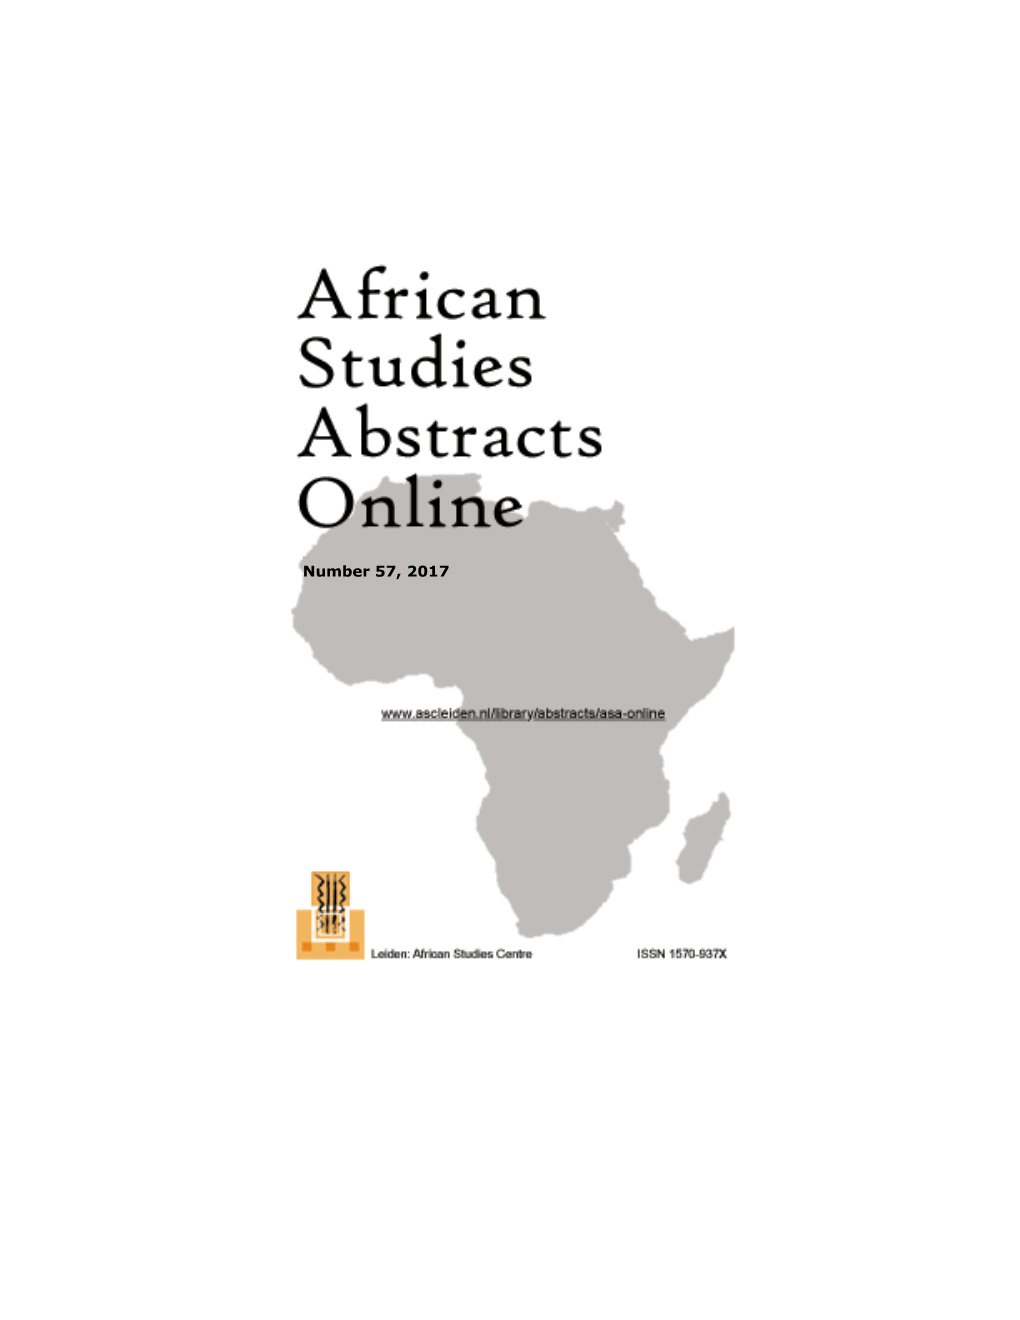 African Studies Abstracts Online: Number 57, 2017